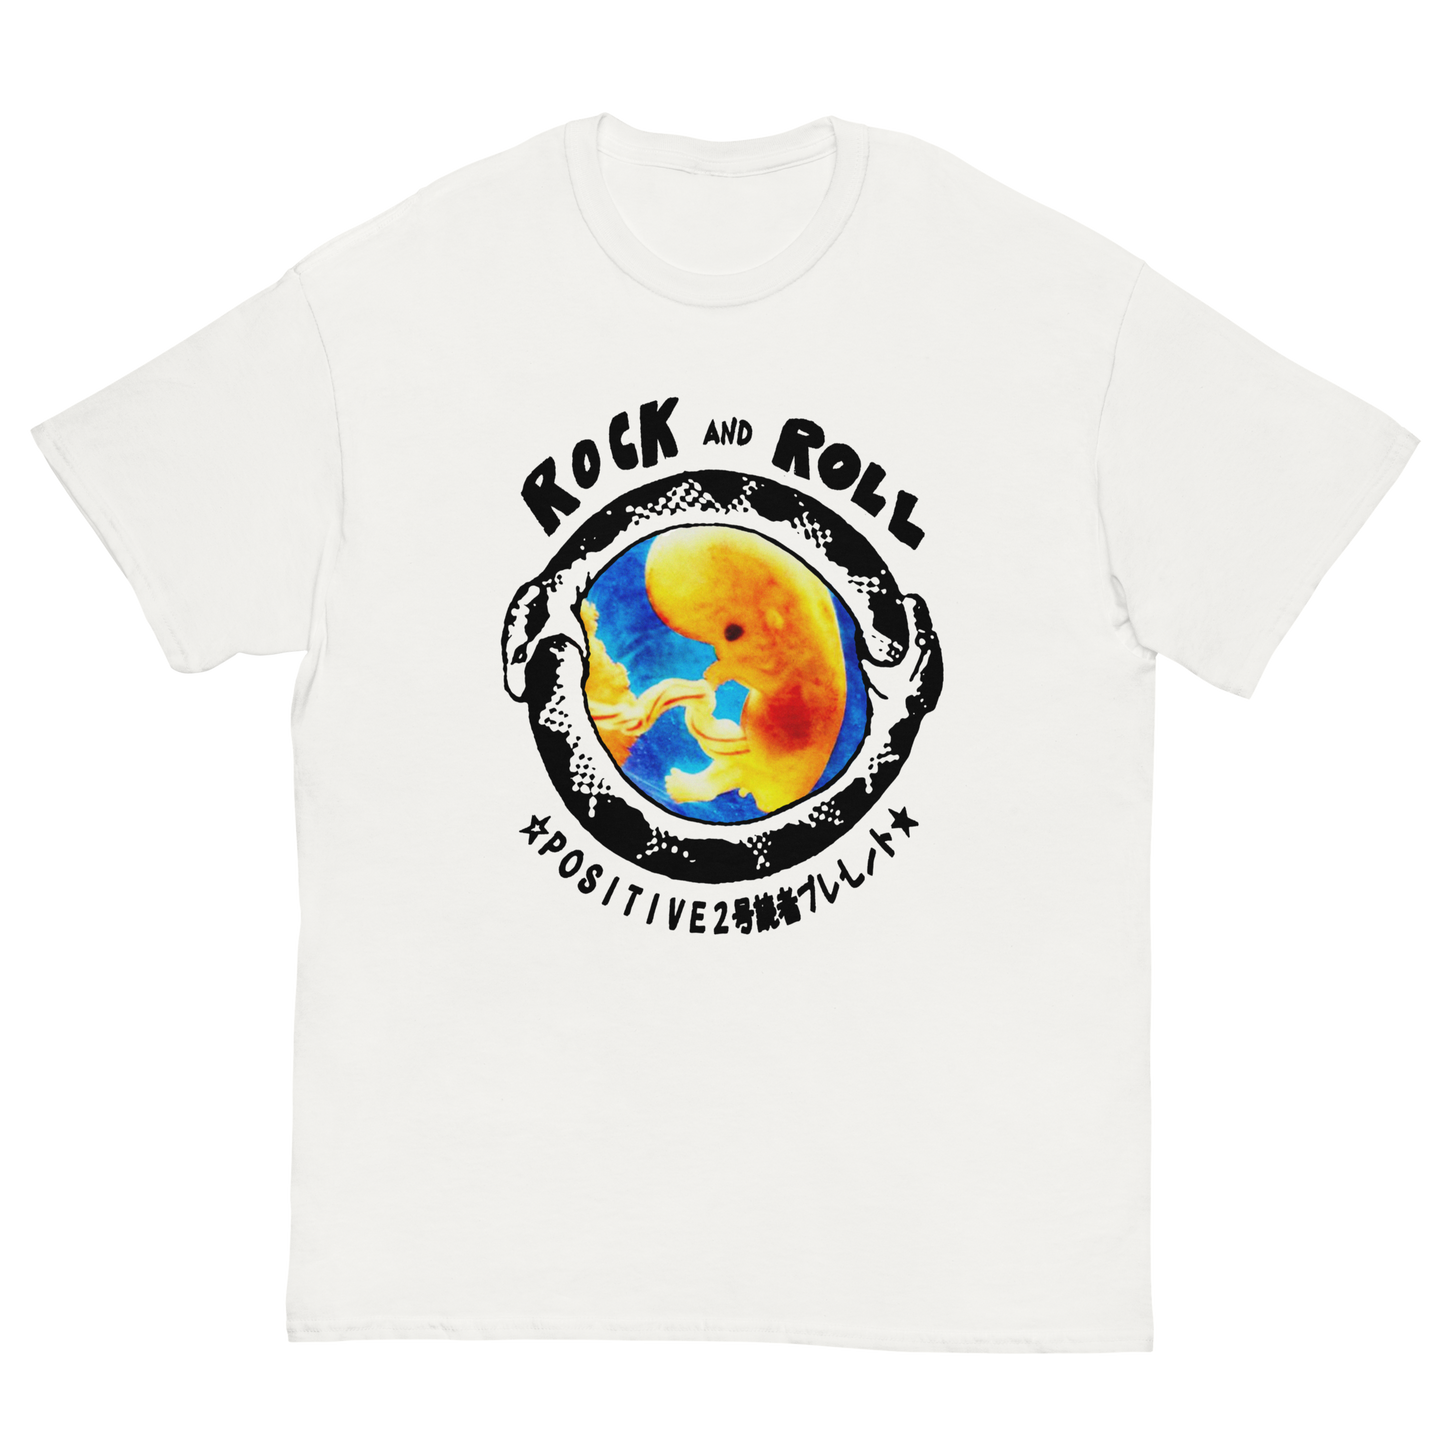 ROCK AND ROLL T-SHIRT